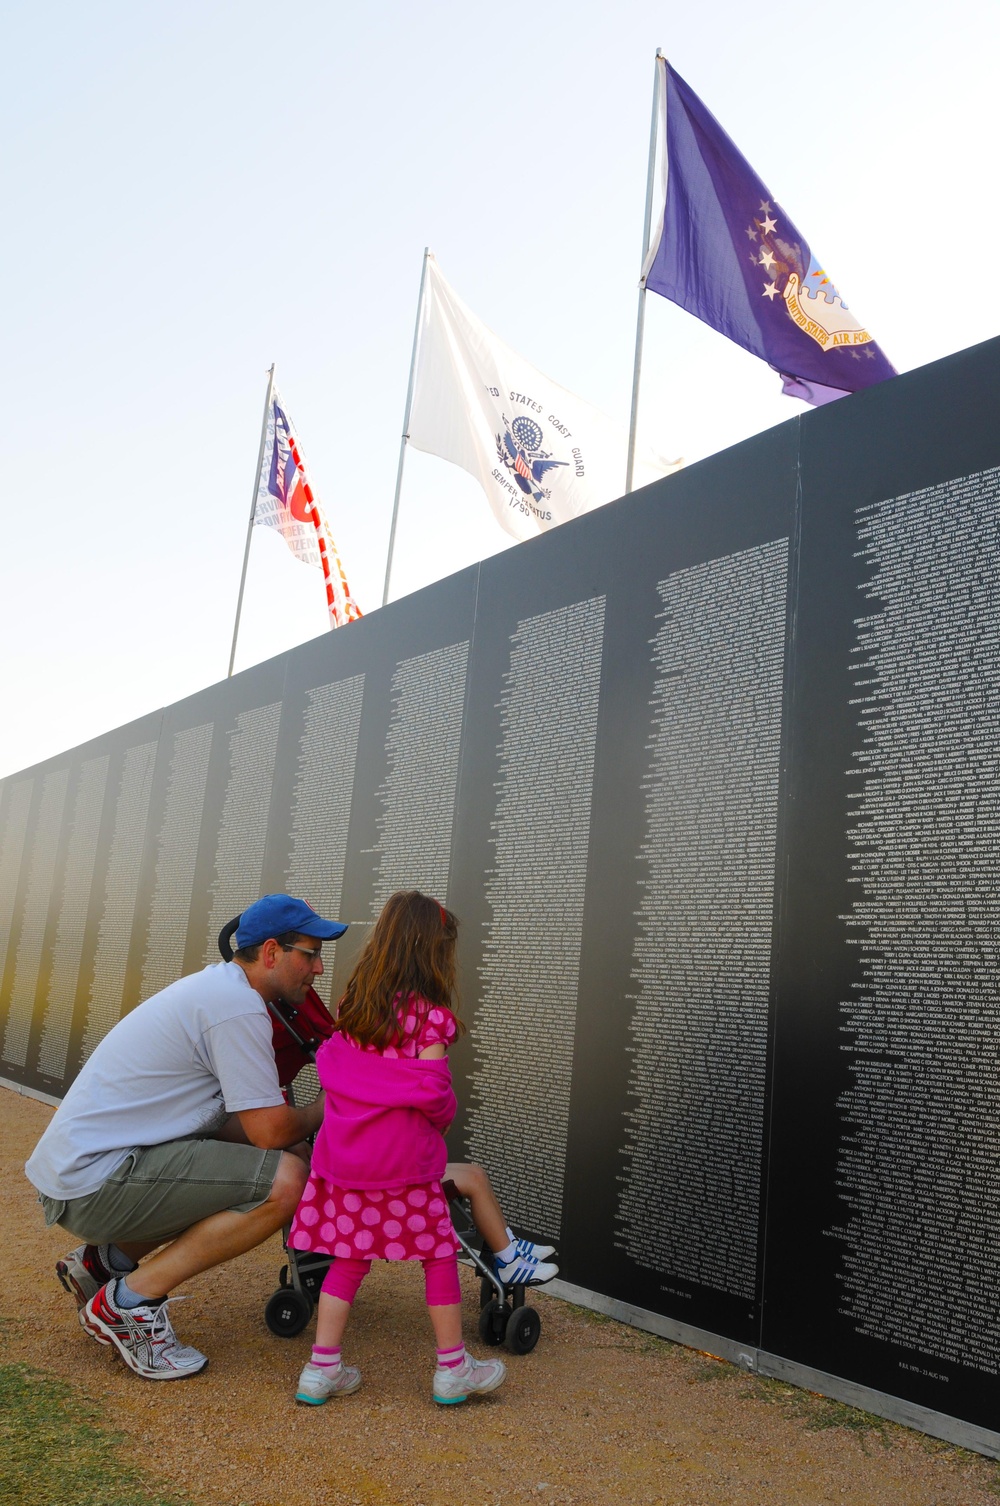 Vietnam War Memorial displayed at the American Heroes Air Show on Camp Mabry